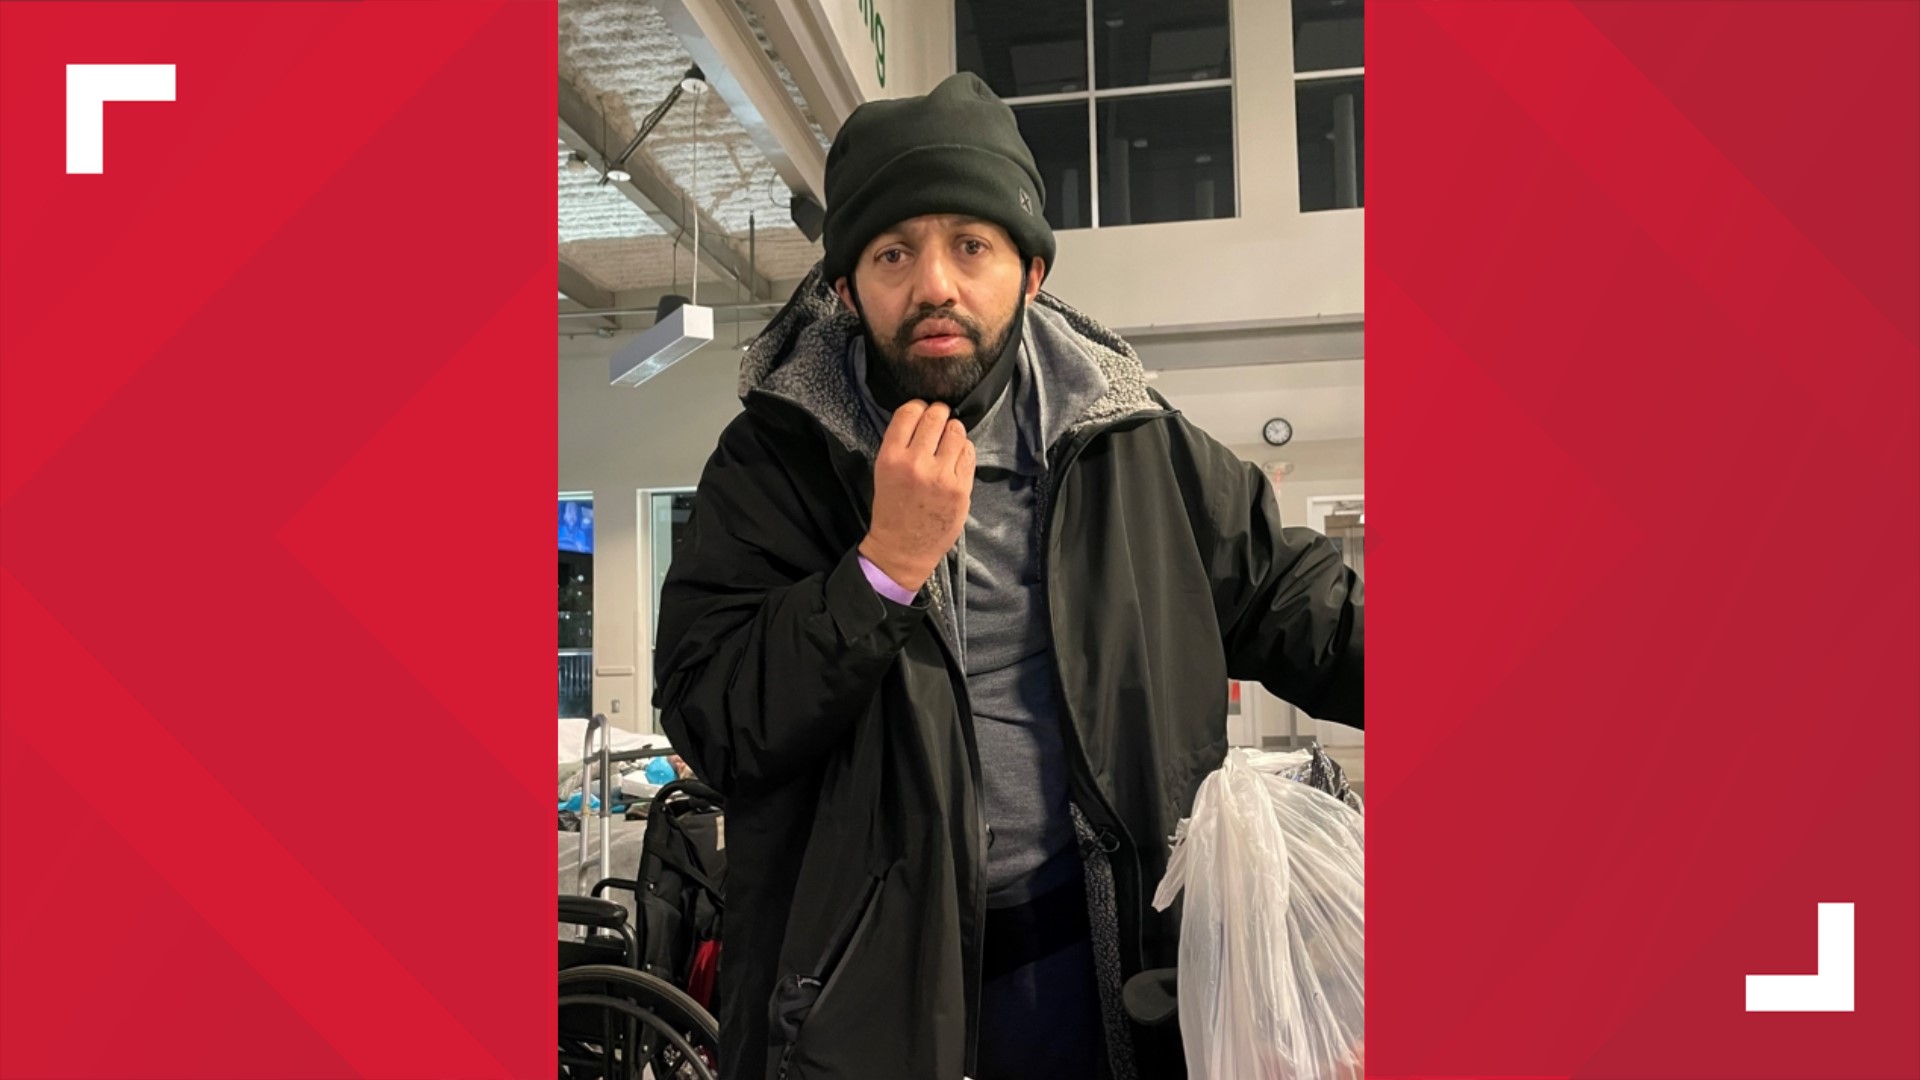 Malek Faisel Akram arrived in the U.S. Dec. 29. The first known sighting of him in North Texas was Jan. 2 at a homeless shelter near downtown Dallas.